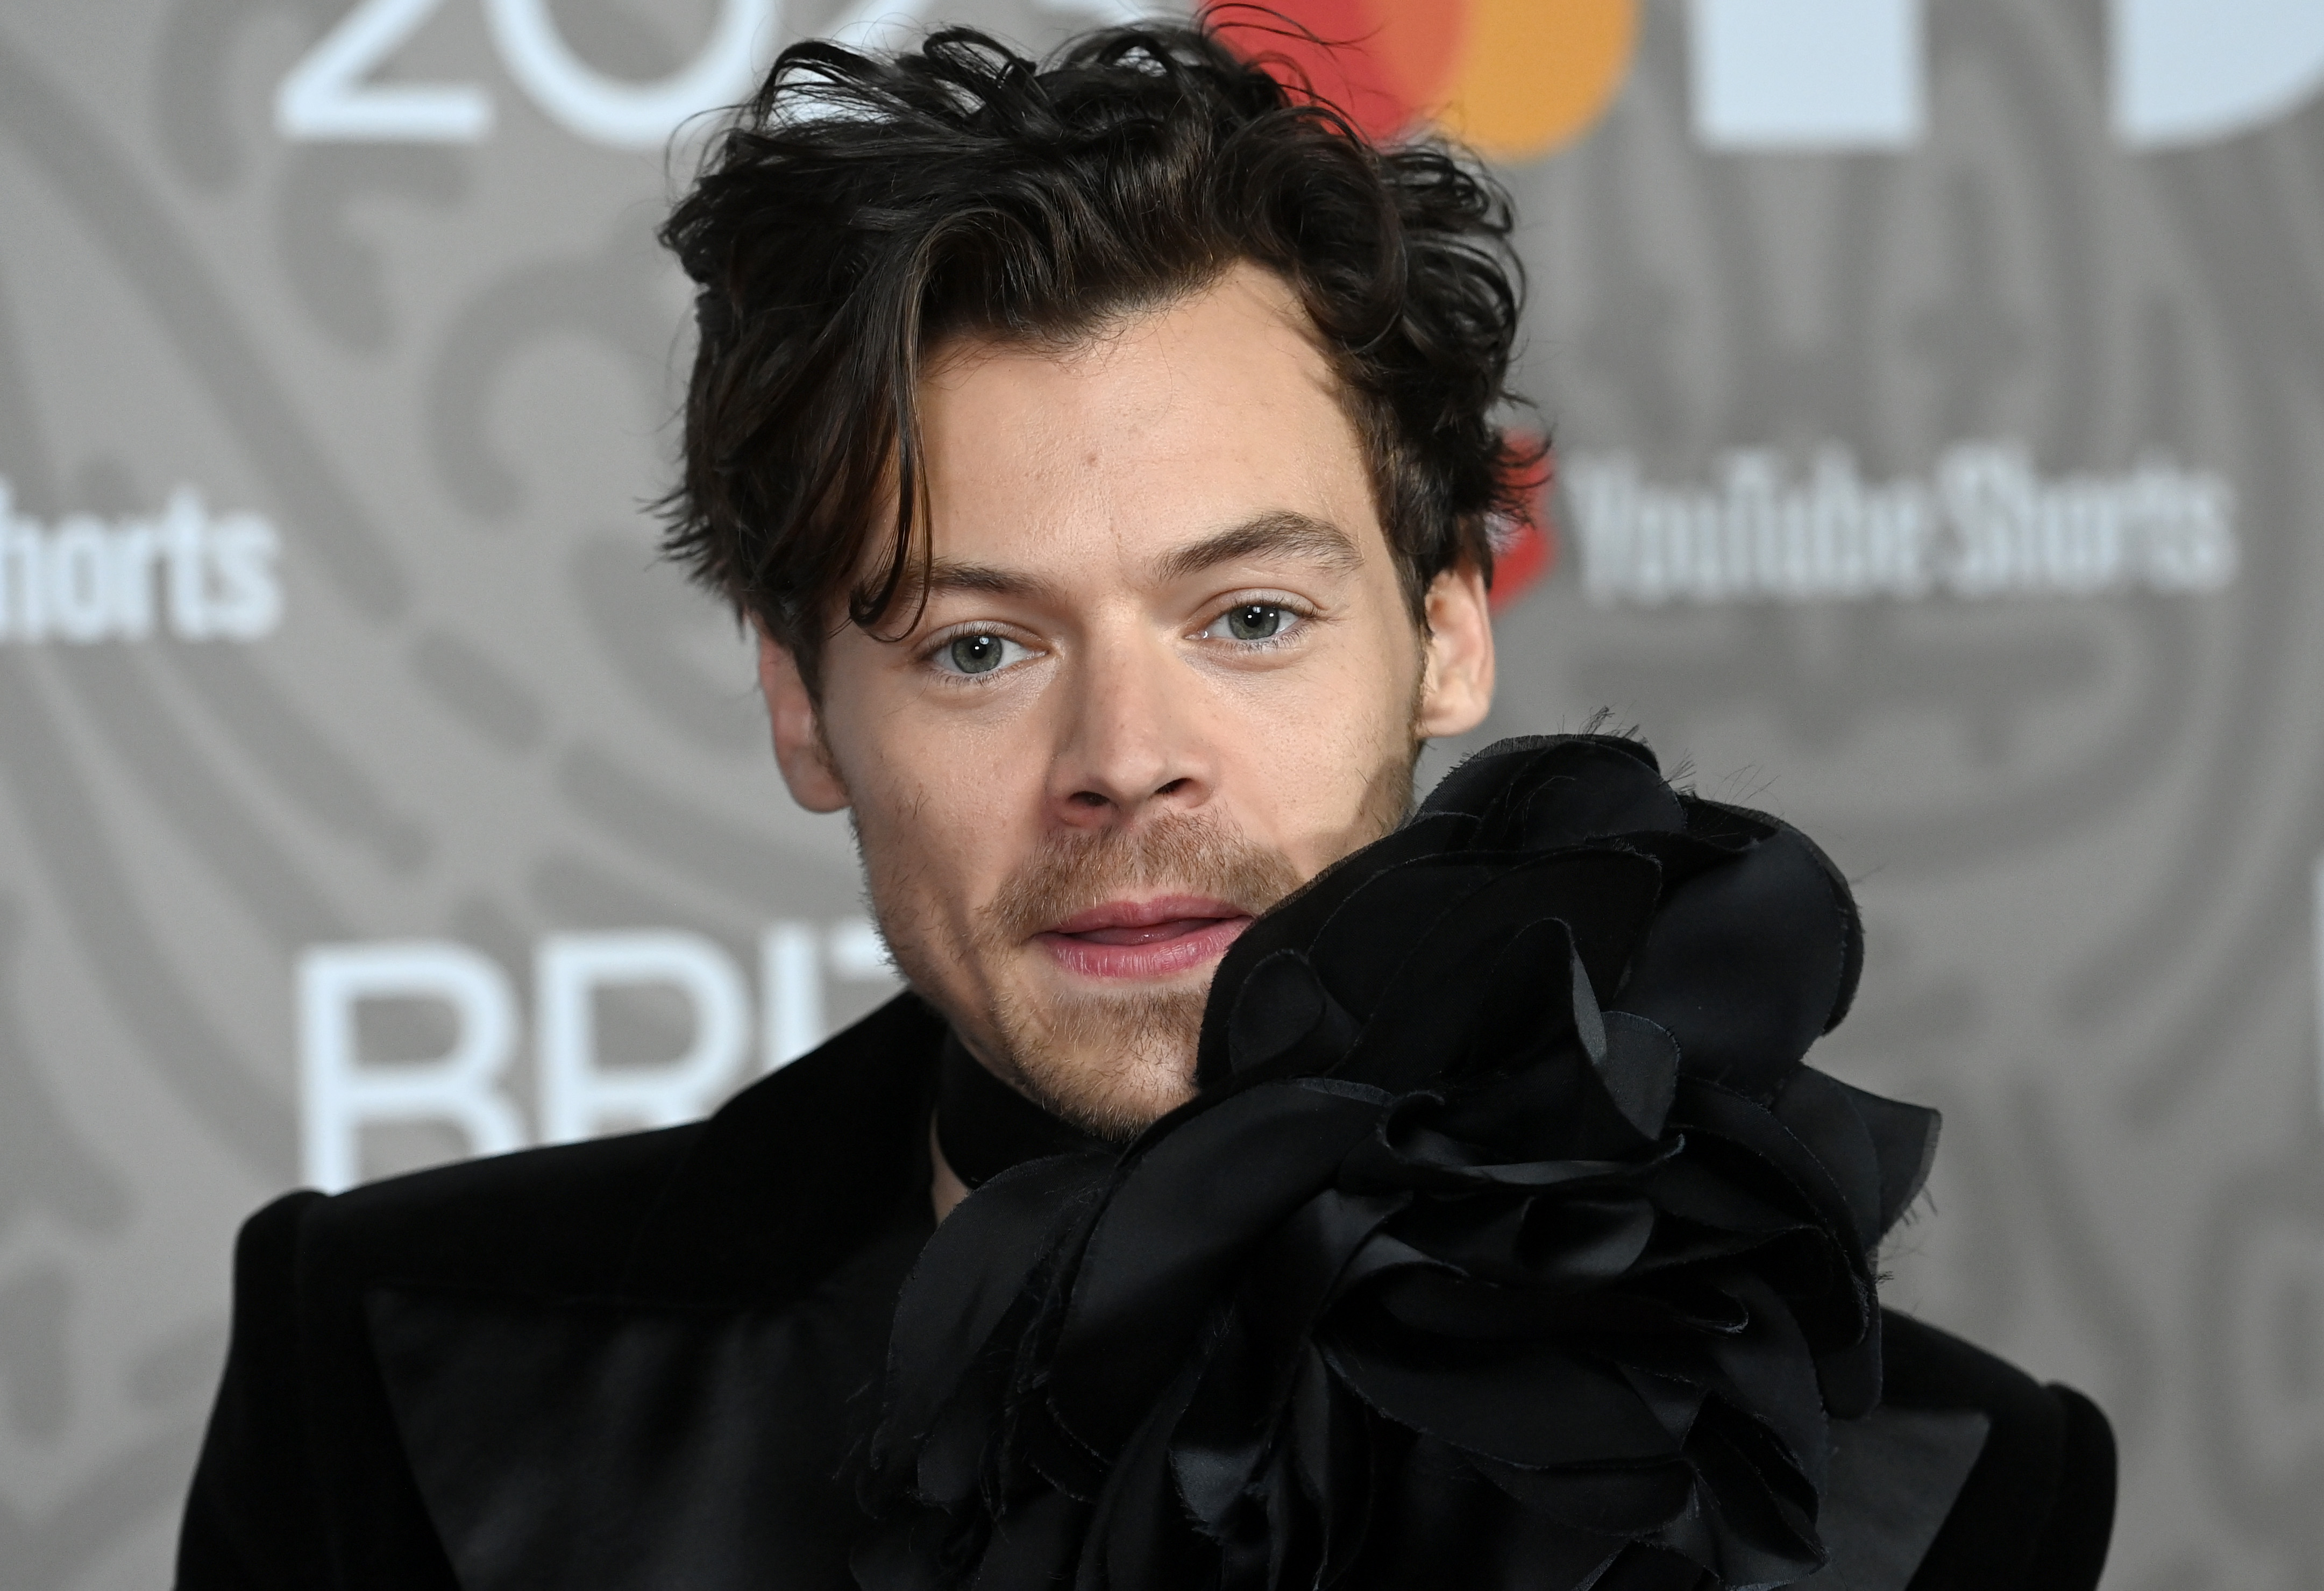 Harry Styles at The BRIT Awards 2023 on February 11, 2023, in London, England. | Source: Getty Images